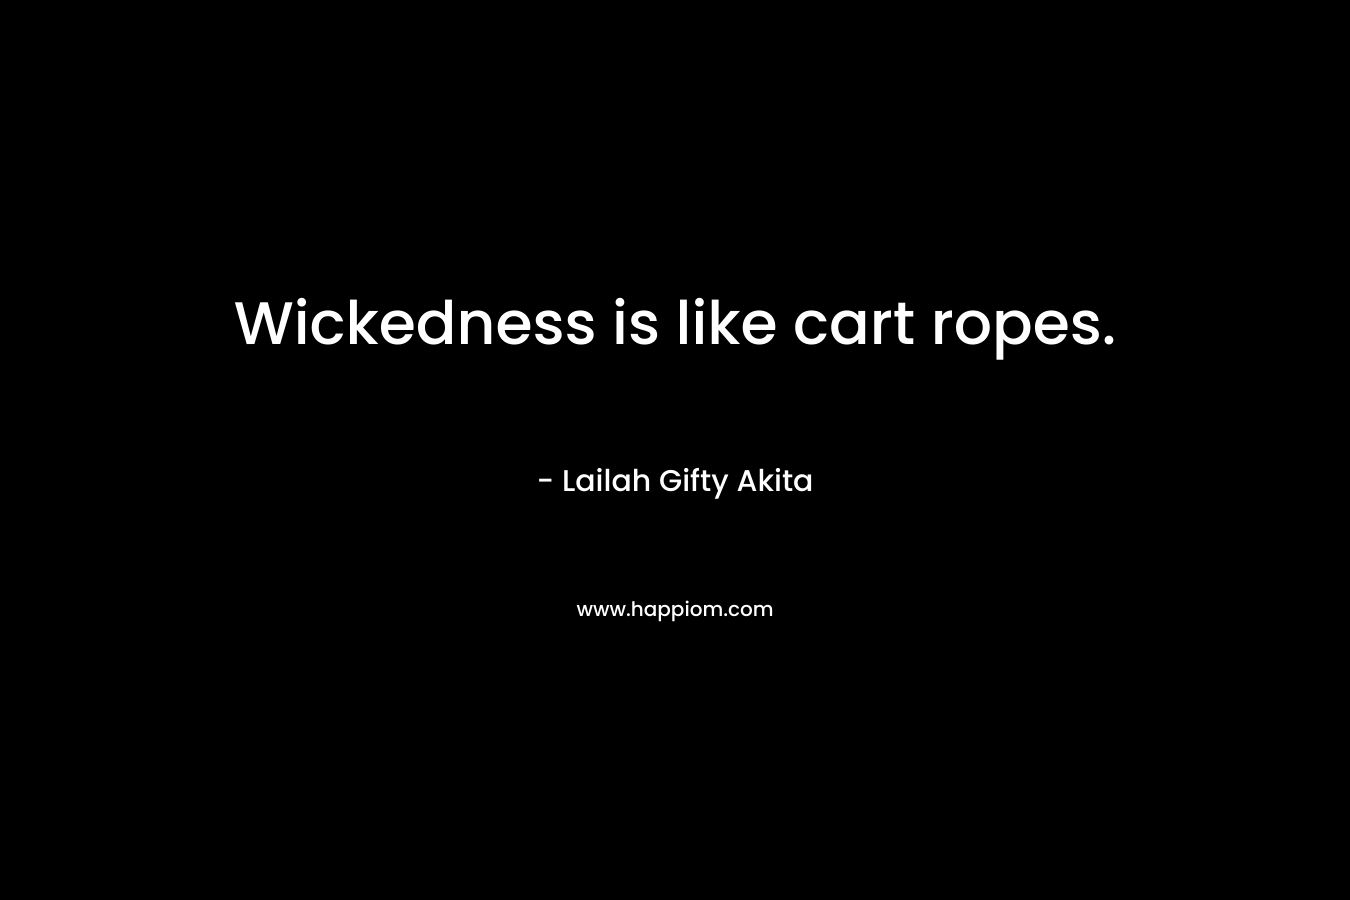 Wickedness is like cart ropes.